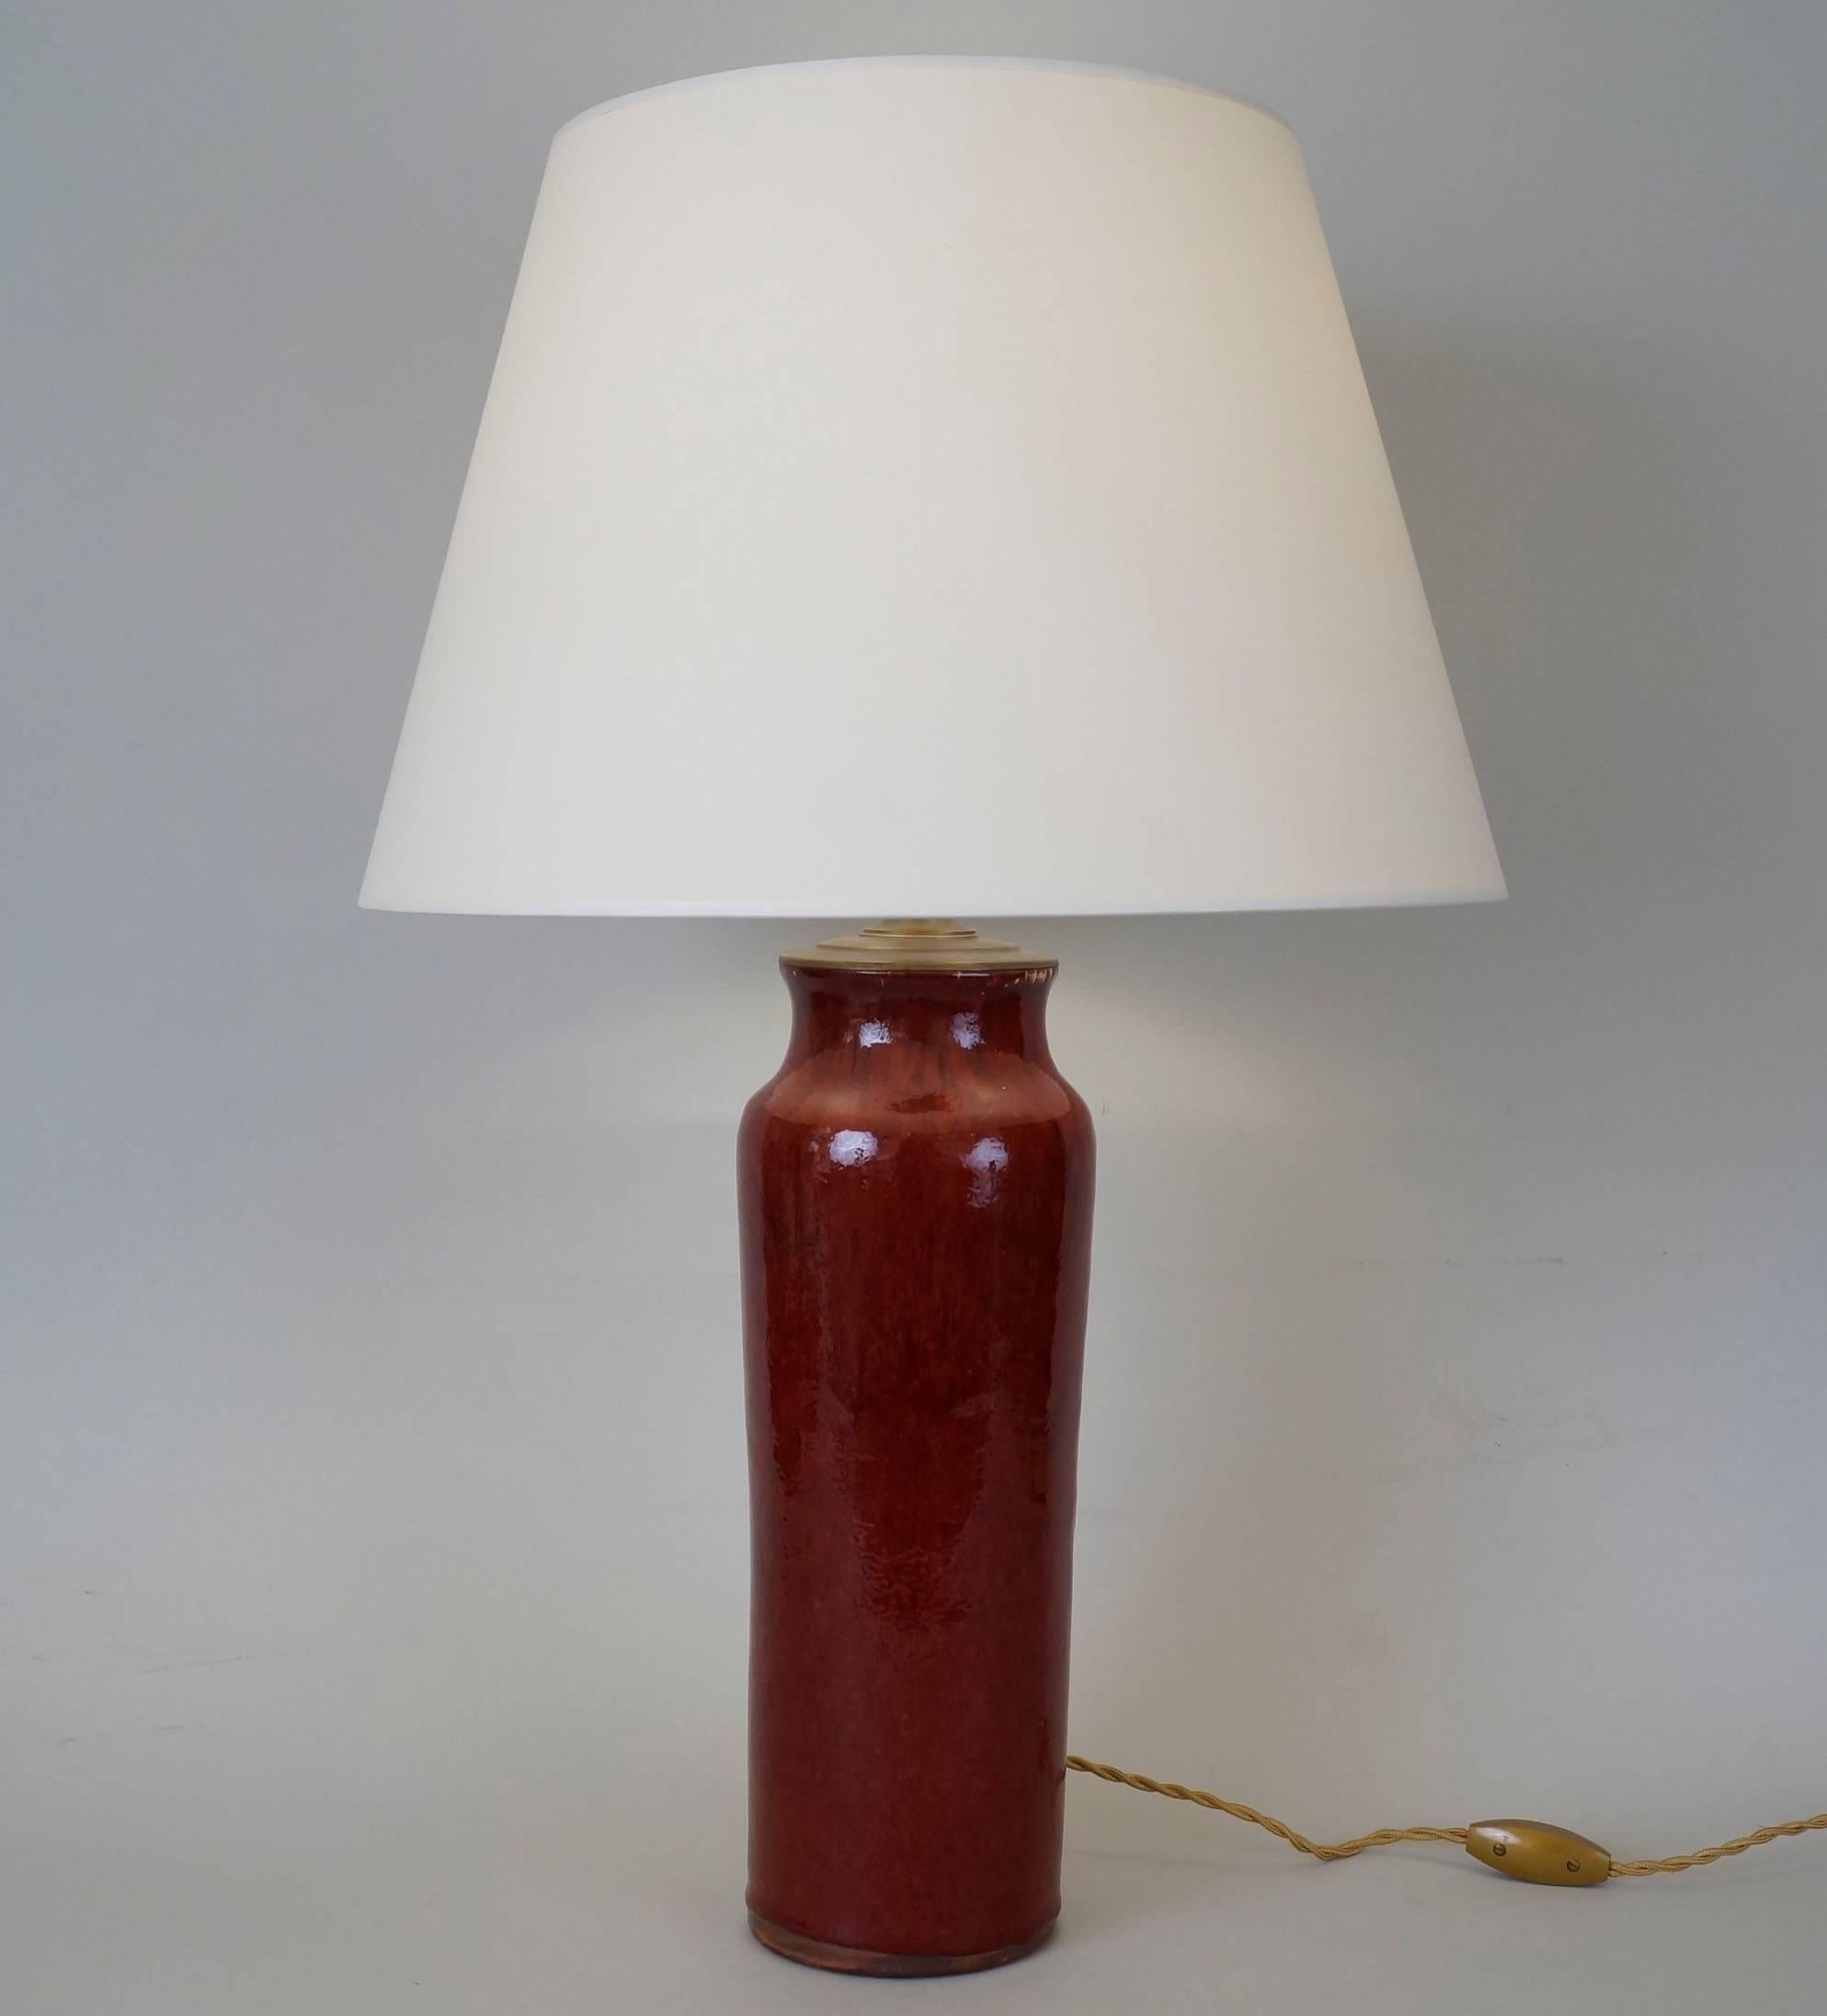 Oxblood red ceramic table lamp.
Adjustable height.
Custom-made fabric lampshade.
Rewired with twisted silk cord.
US standard plug on request.
Ceramic body height: 35 cm - 13.8 in.
Height with lampshade: 63 cm - 24.8 in.